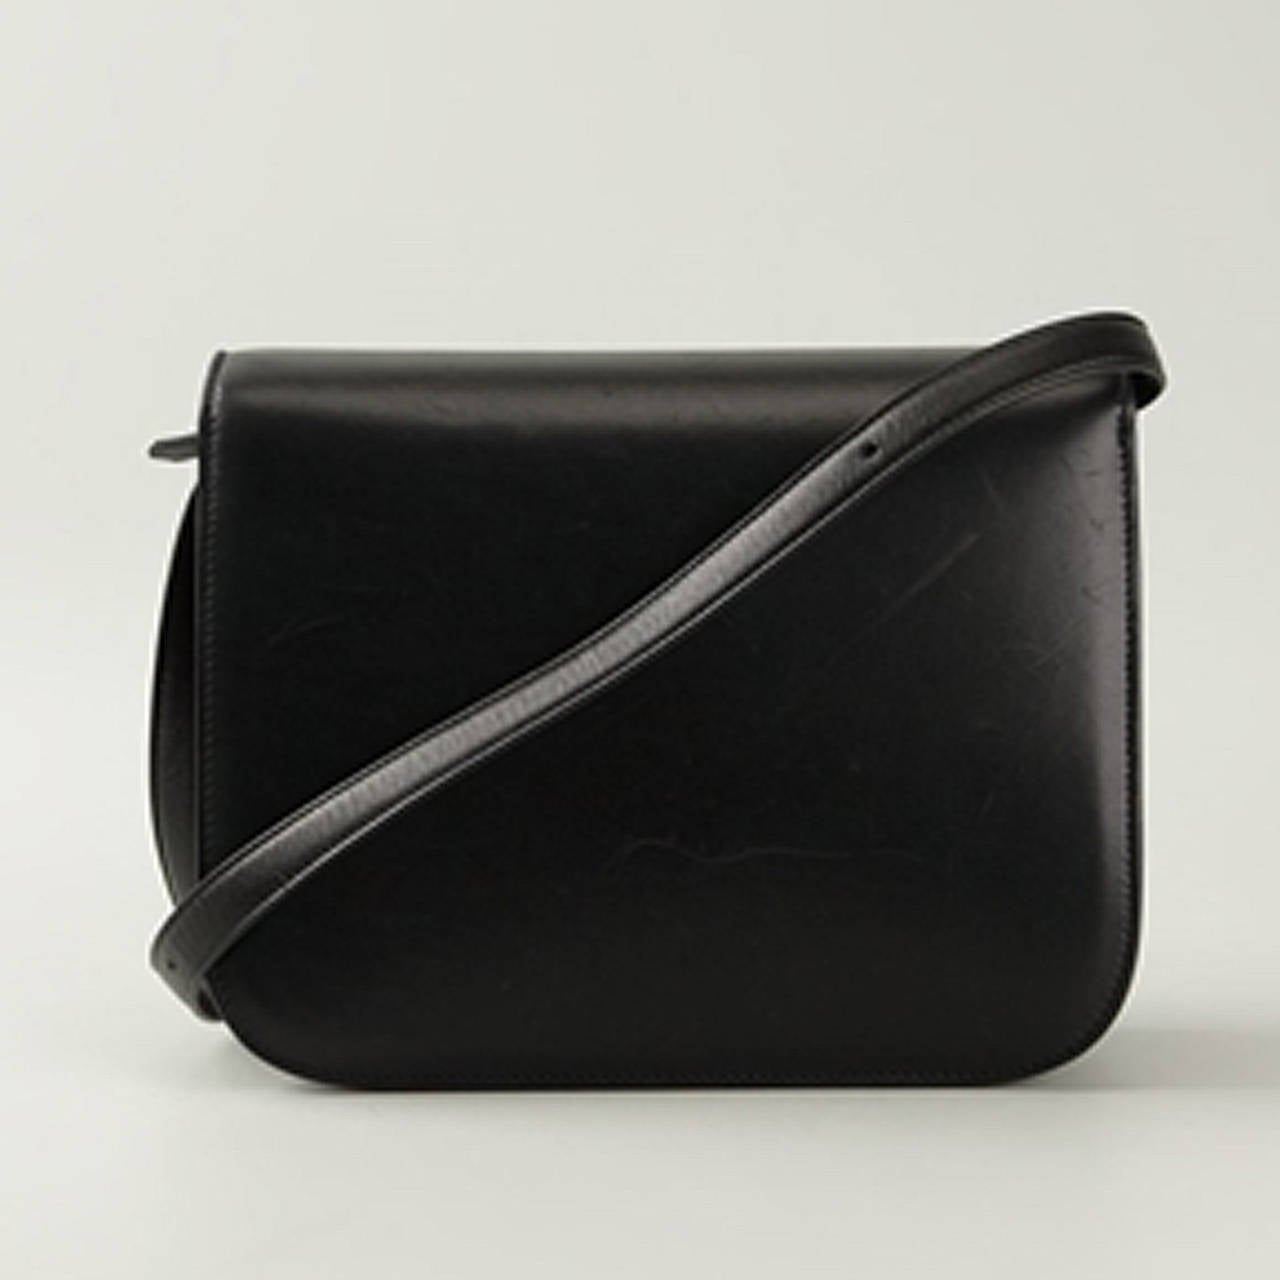 A complete classic that perfectly complements any look, this Black Leather 'Box' crossbody bag from Céline Vintage features a rounded shape, a foldover top with push-lock closure, a shoulder strap, a front embossed logo stamp, multiple interior